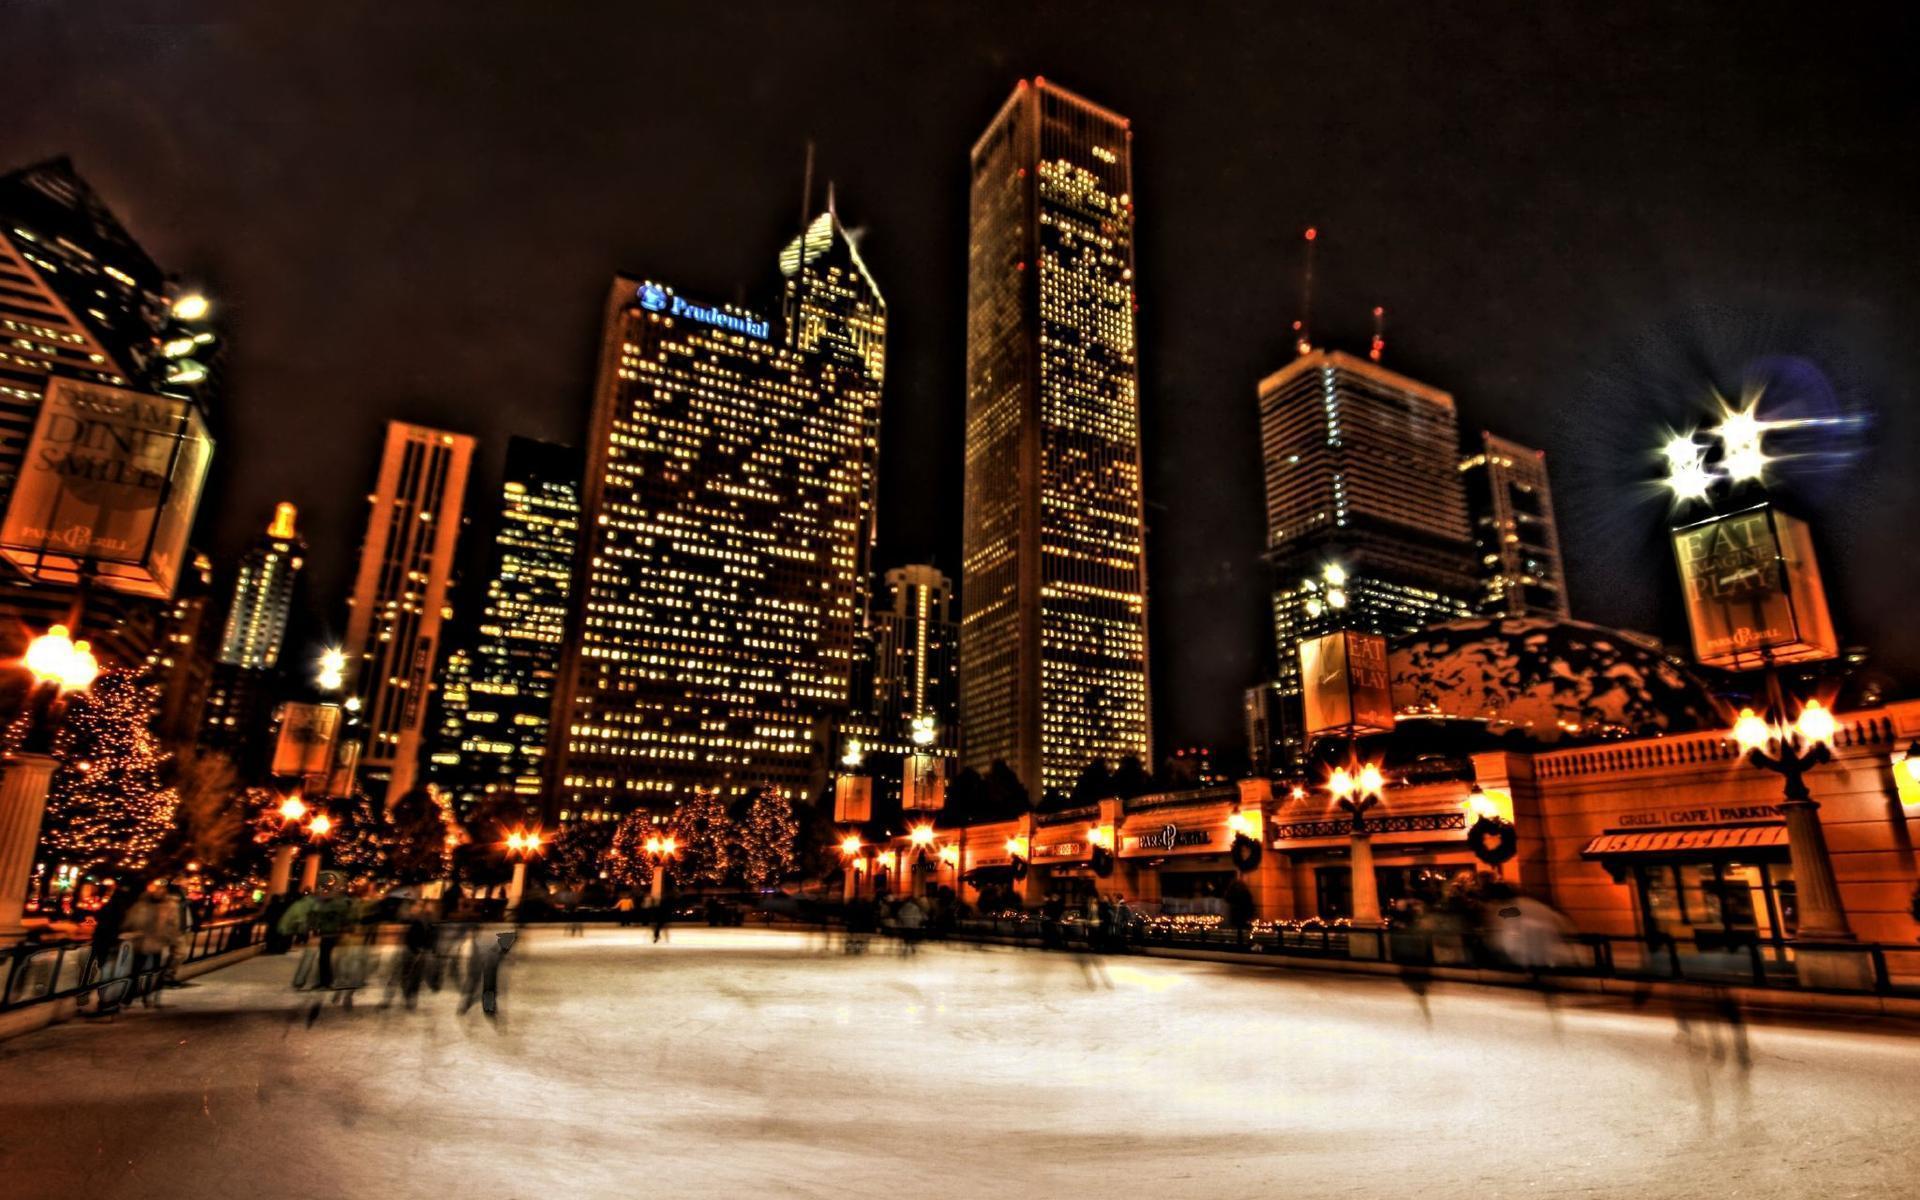 Ice Skating In Chicago 3 Chicago Wallpaper HD Free Wallpaper